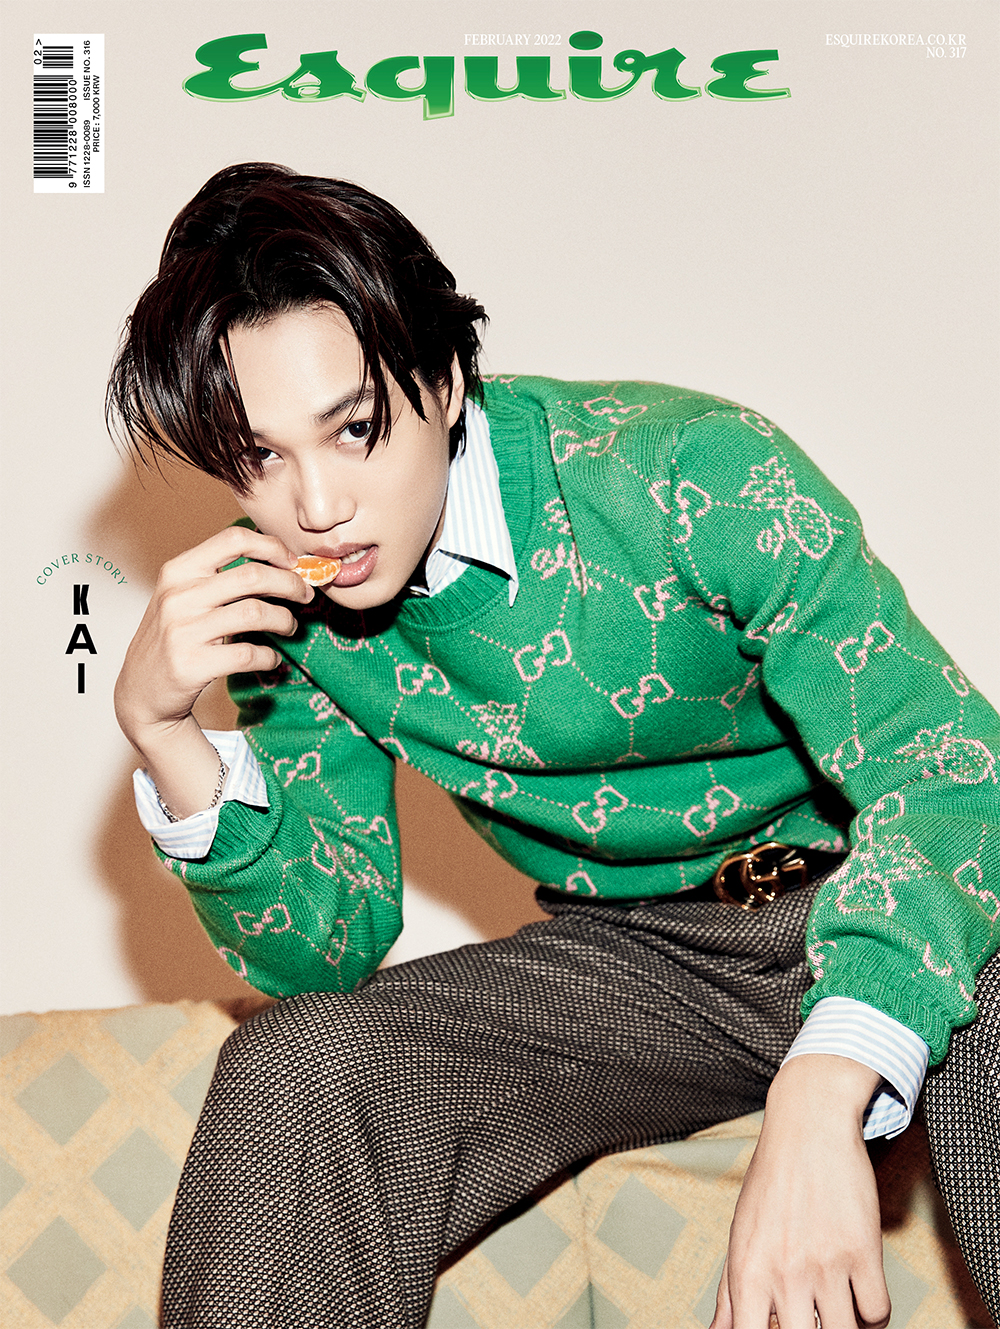 EXO KAI 'Peaches' remix single, released today... Participated in SUMIN and Noisecat